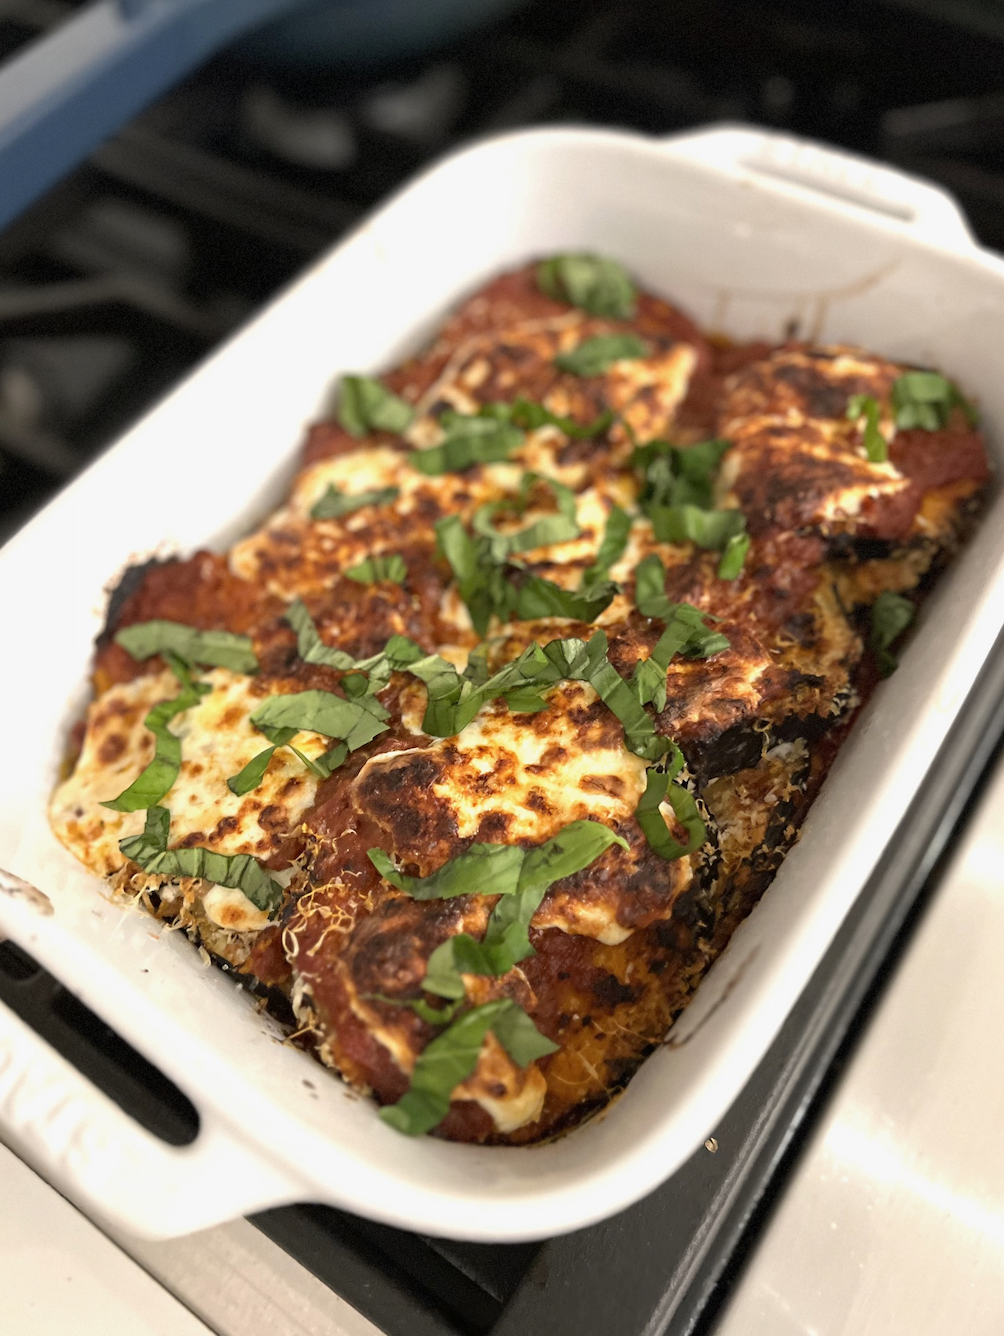 A freshly baked lasagna with melted cheese and basil leaves in a white baking dish